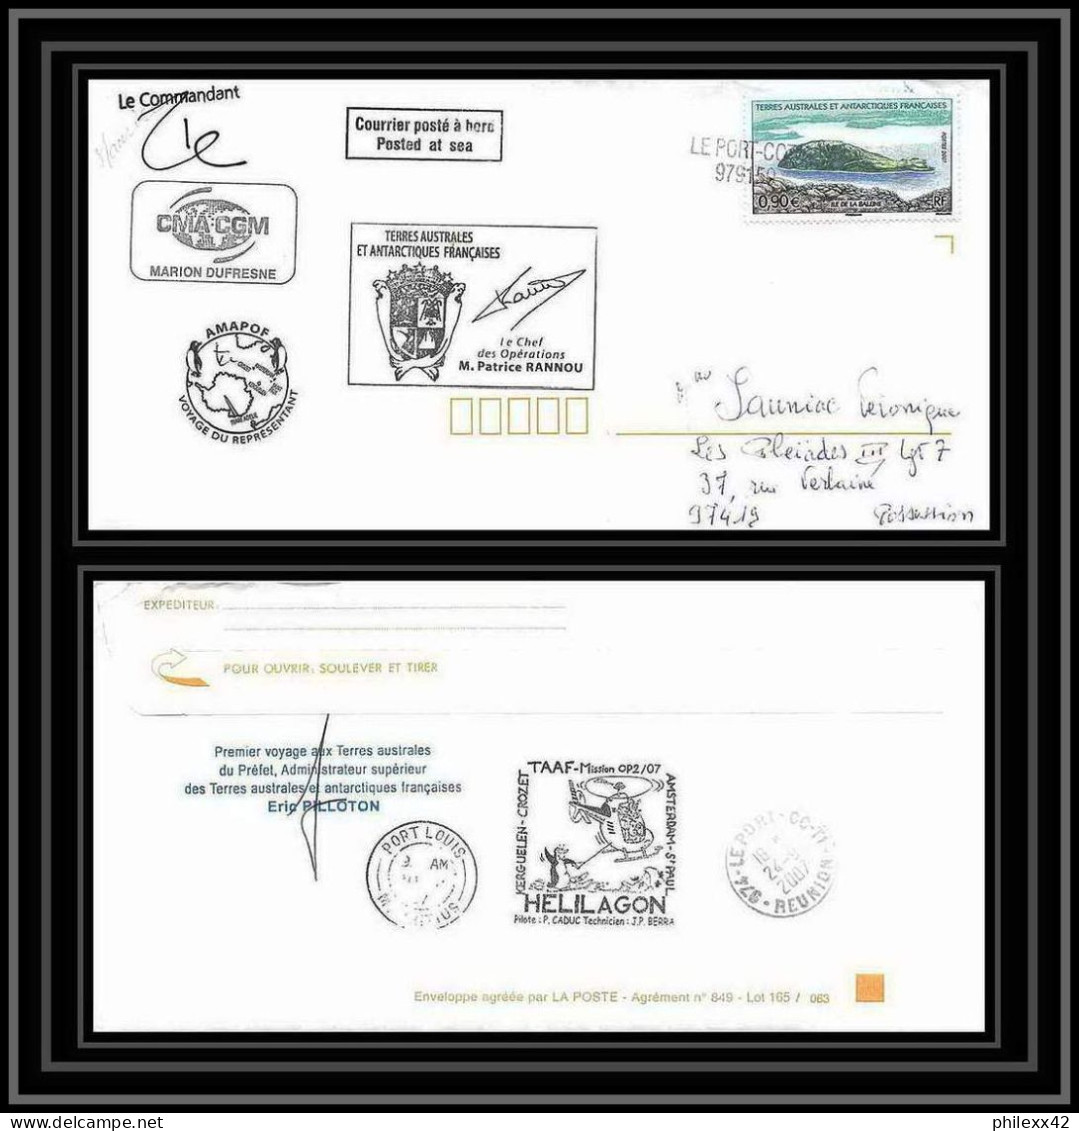 2716 ANTARCTIC Terres Australes (taaf) Dufresne 2 Signé Signed Op 2007/2 Maurice (mauritus) Helilagon Voyage Pilloton - Spedizioni Antartiche